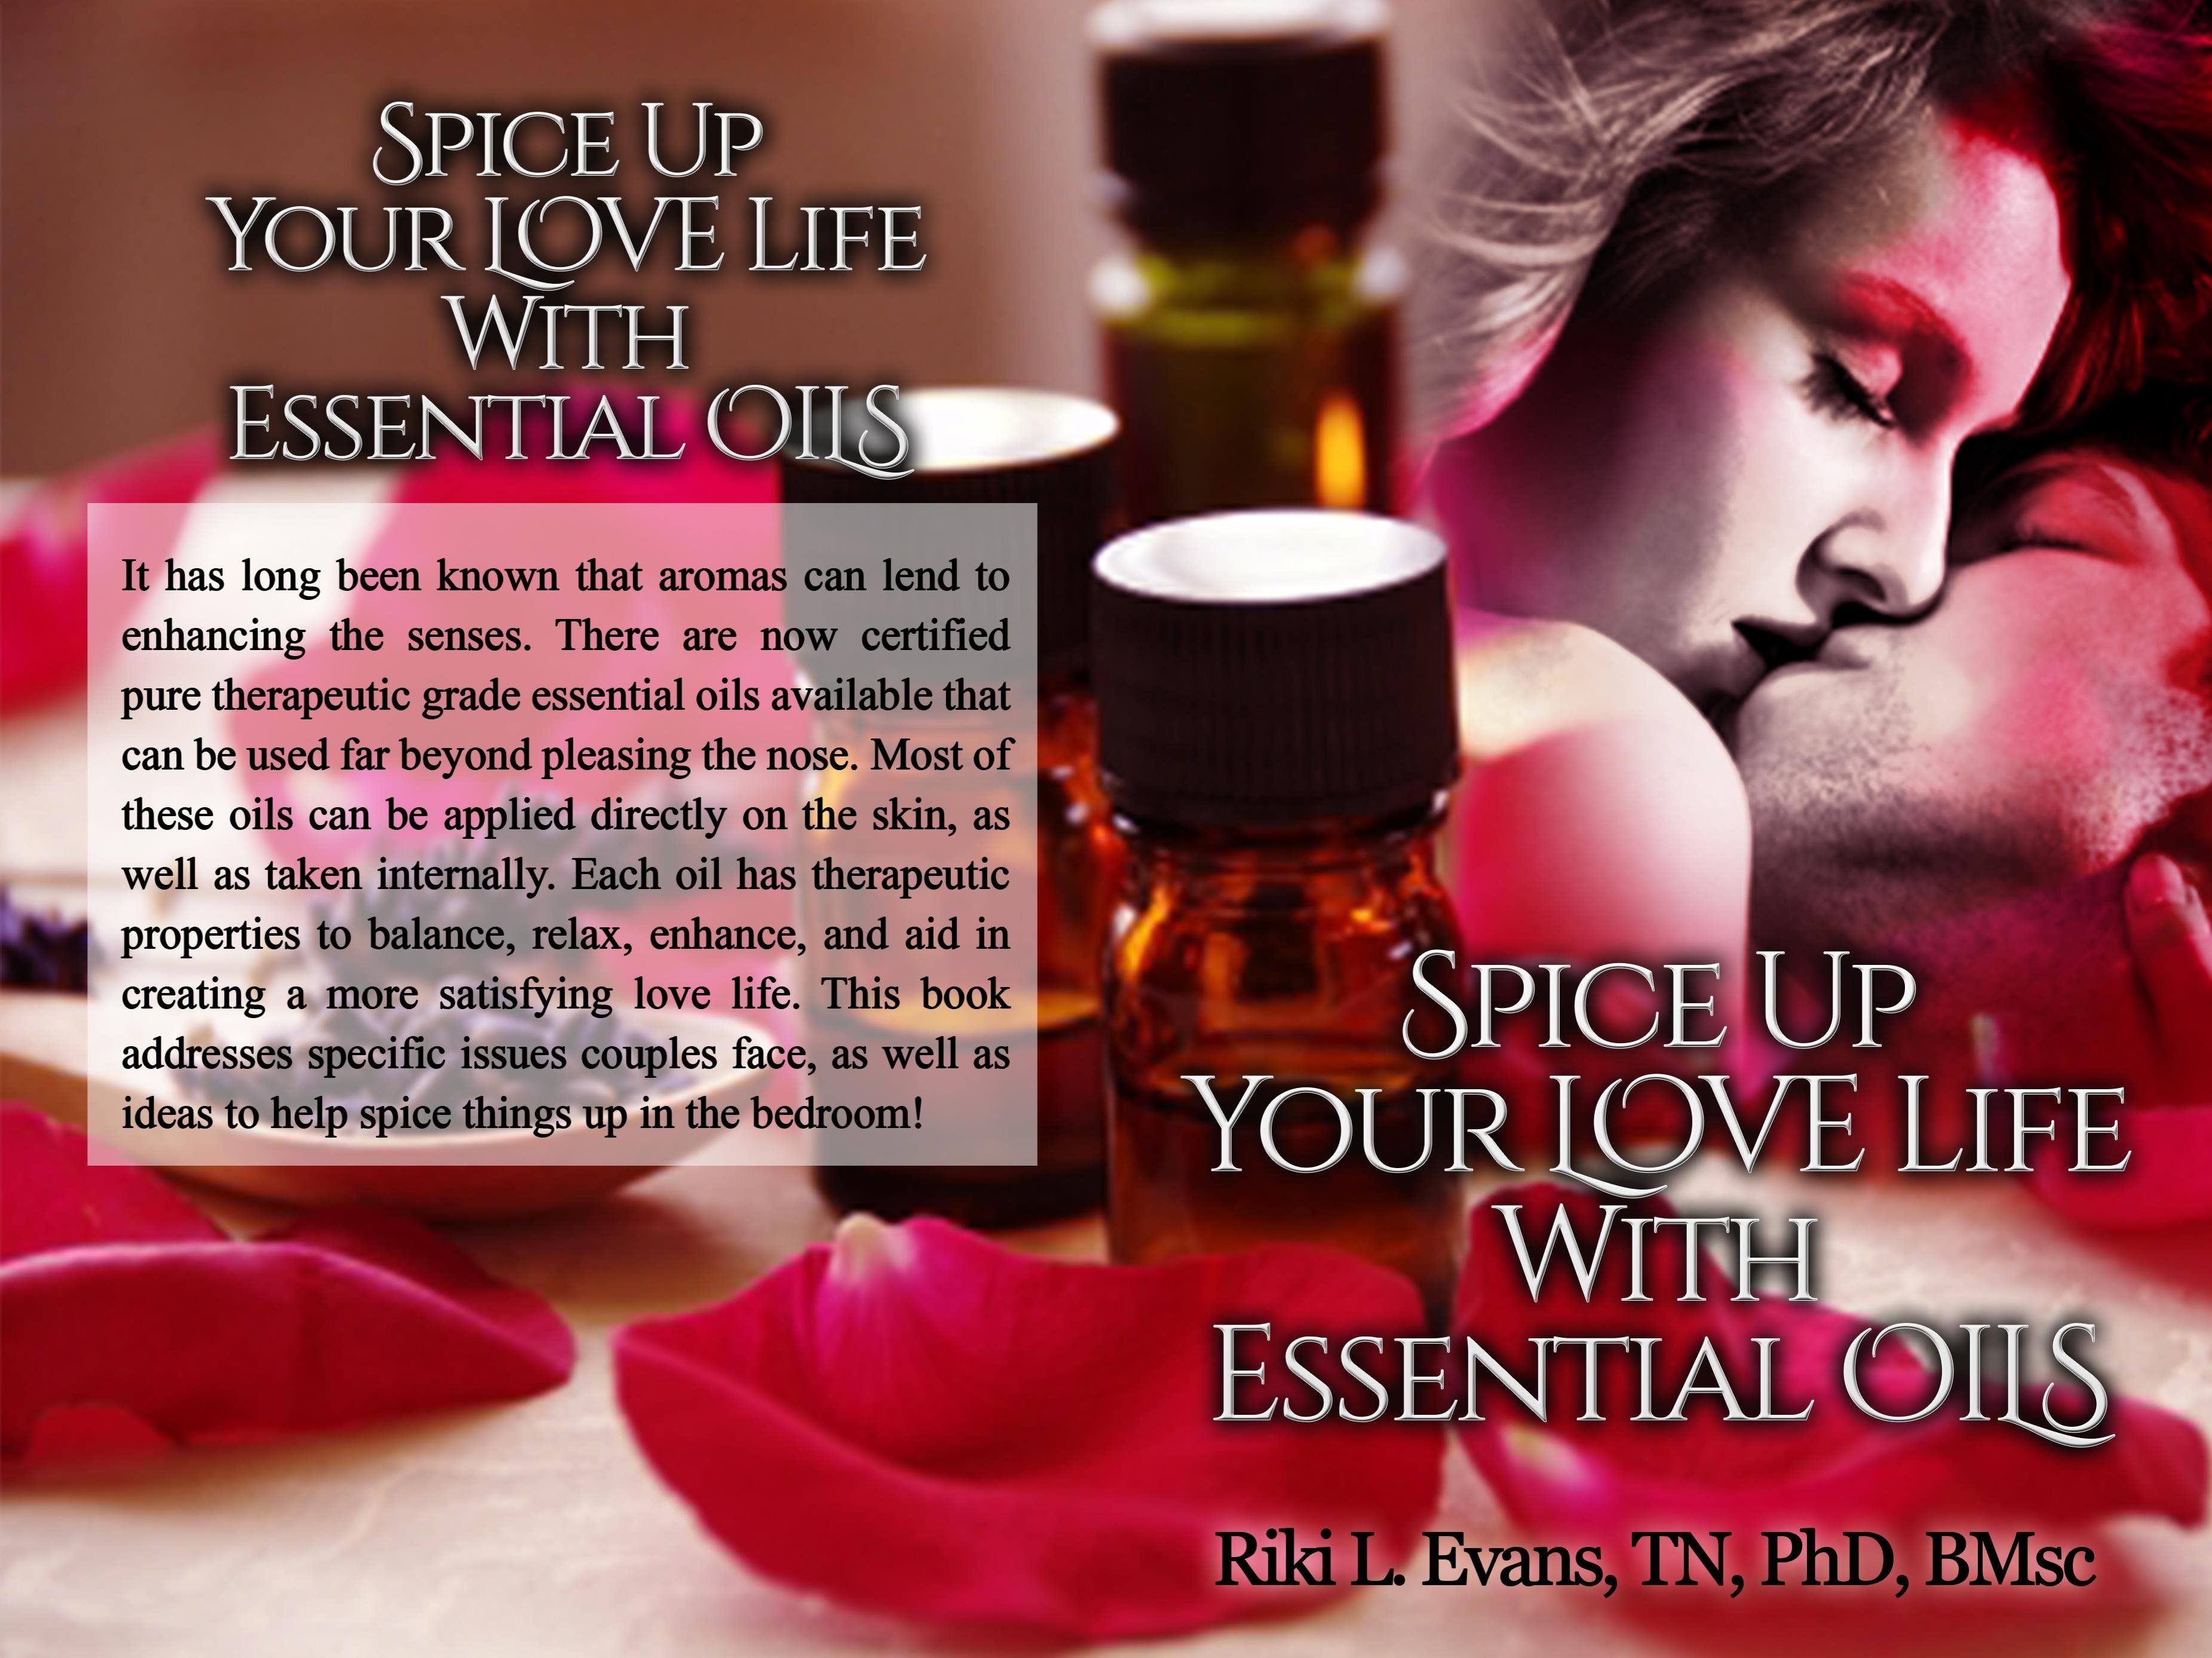 10 Attractive Spice Up Love Life Ideas spice up your love life with essential oilsriki l evans b msc 2022